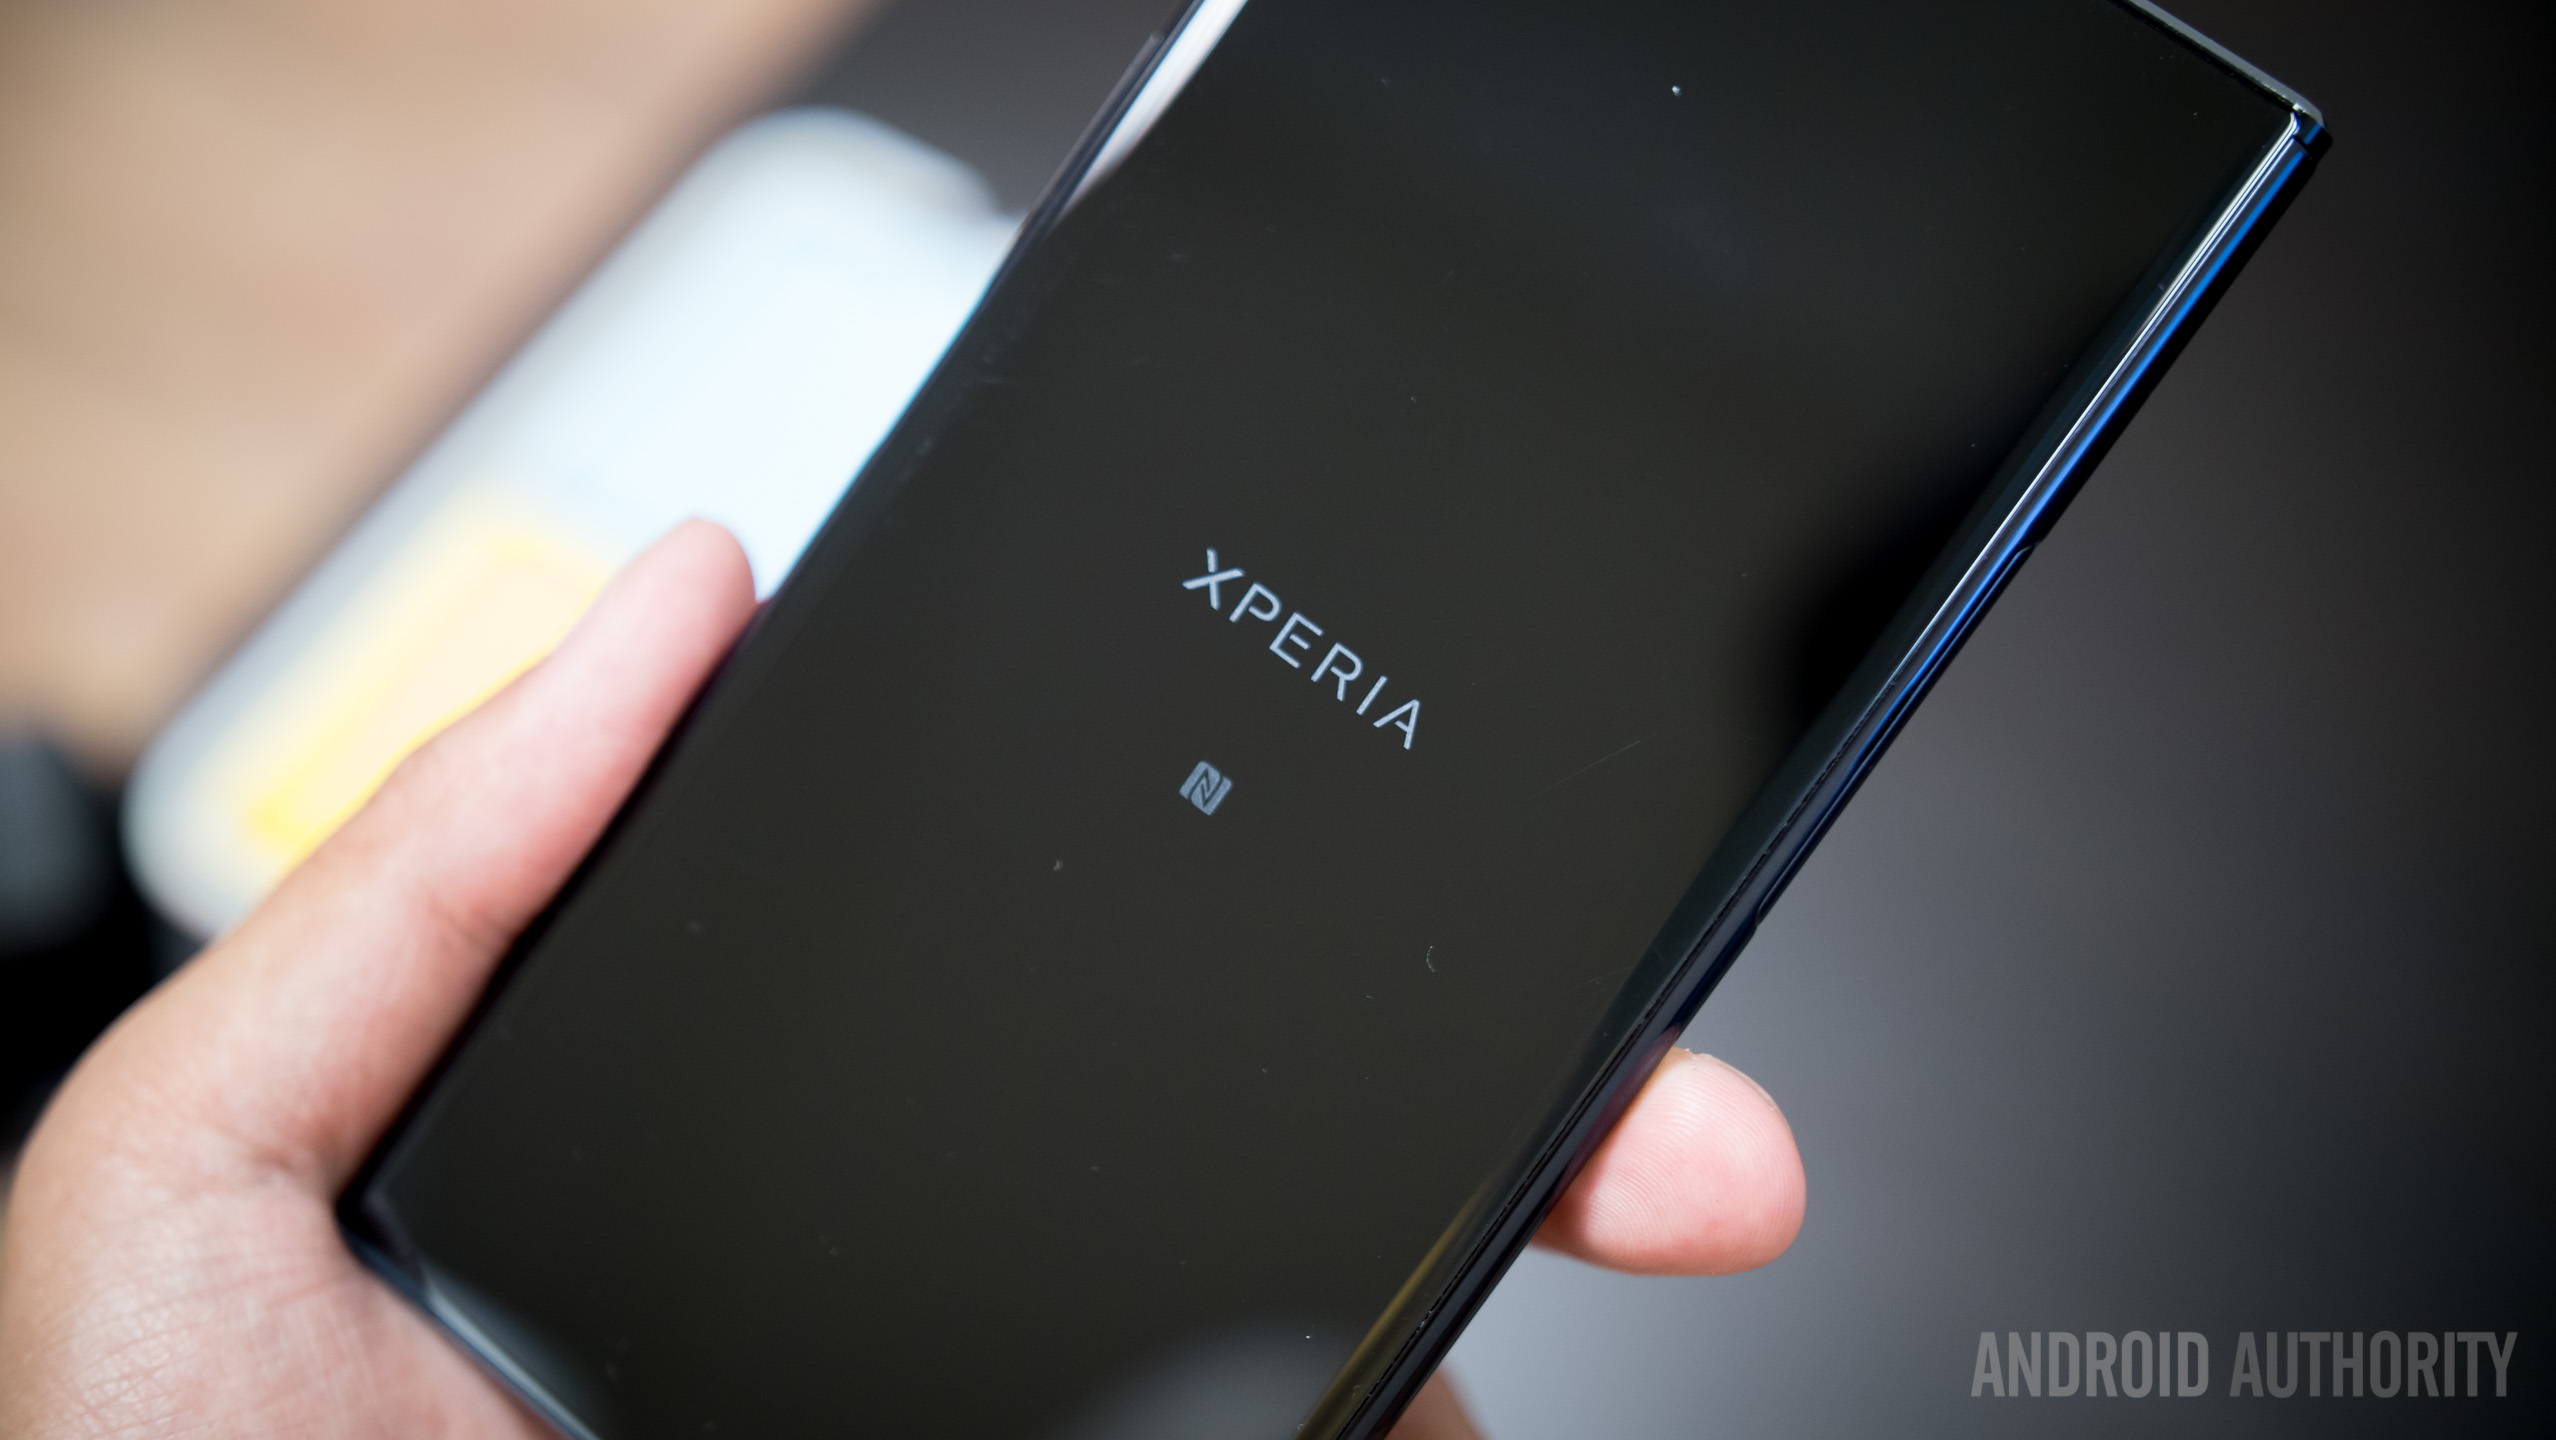 Photo of a black Sony Xperia android phone held in a hand - Sony review 2019